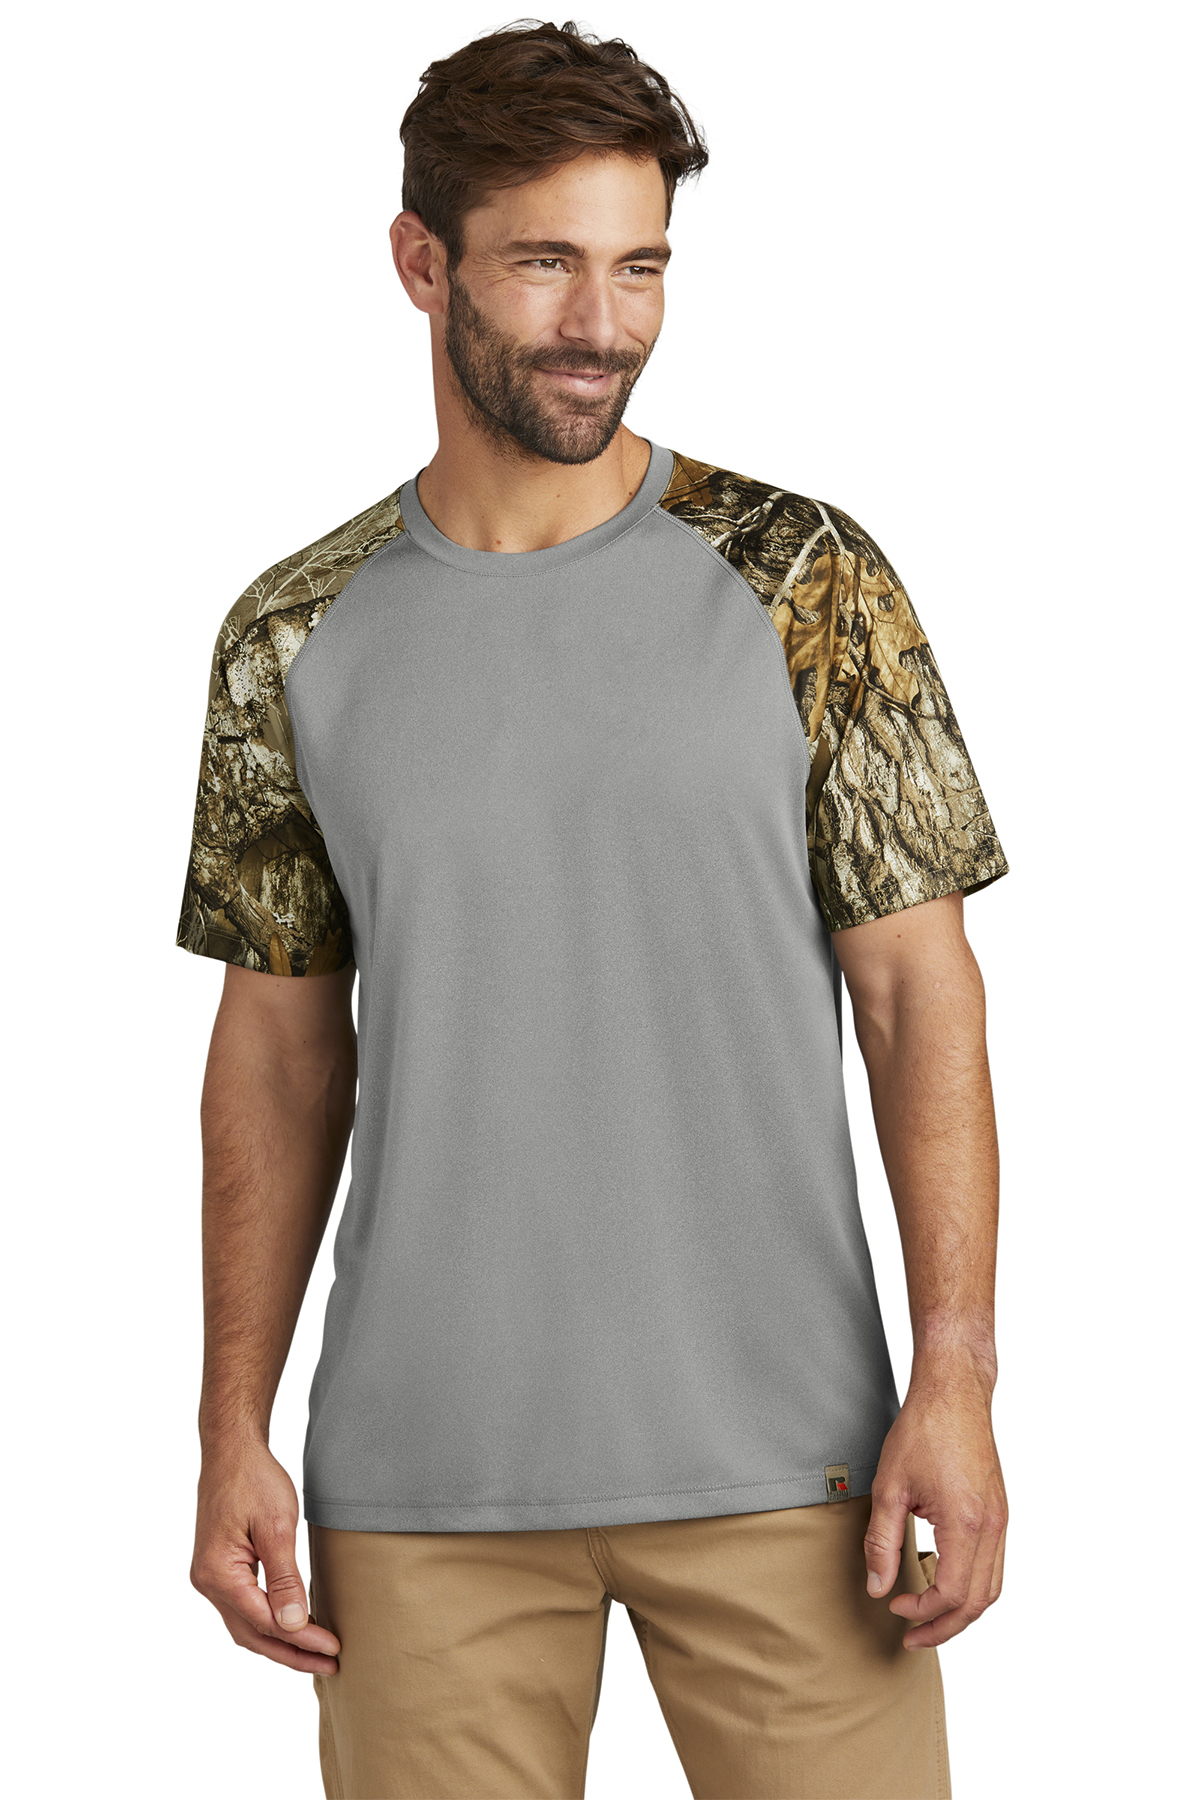 Russell Outdoors Realtree Colorblock Performance Tee